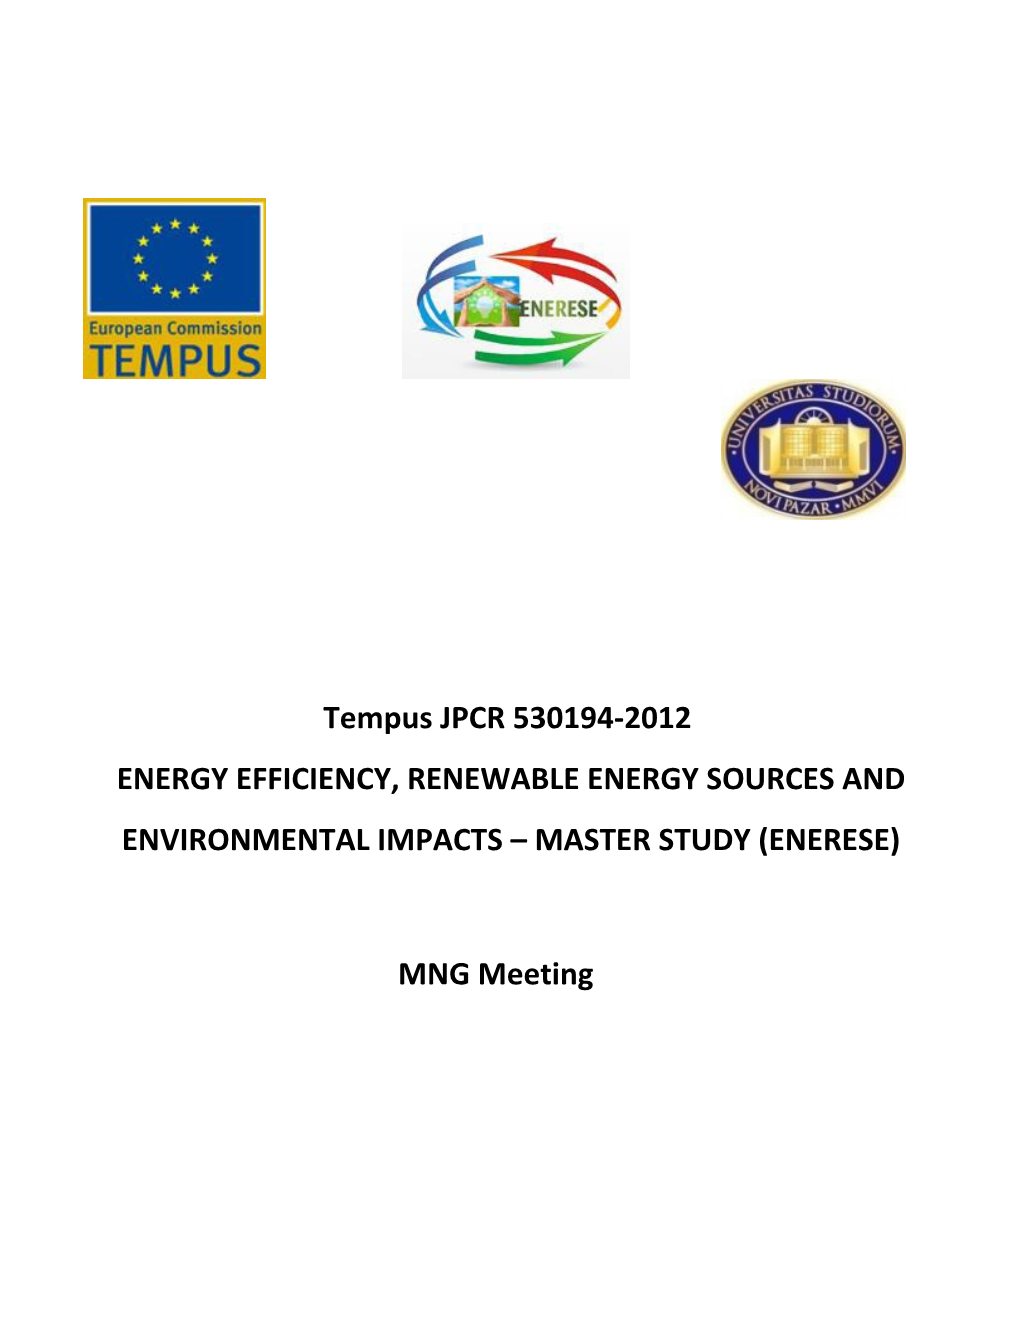 Energy Efficiency, Renewable Energy Sources and Environmental Impacts Master Study (Enerese)